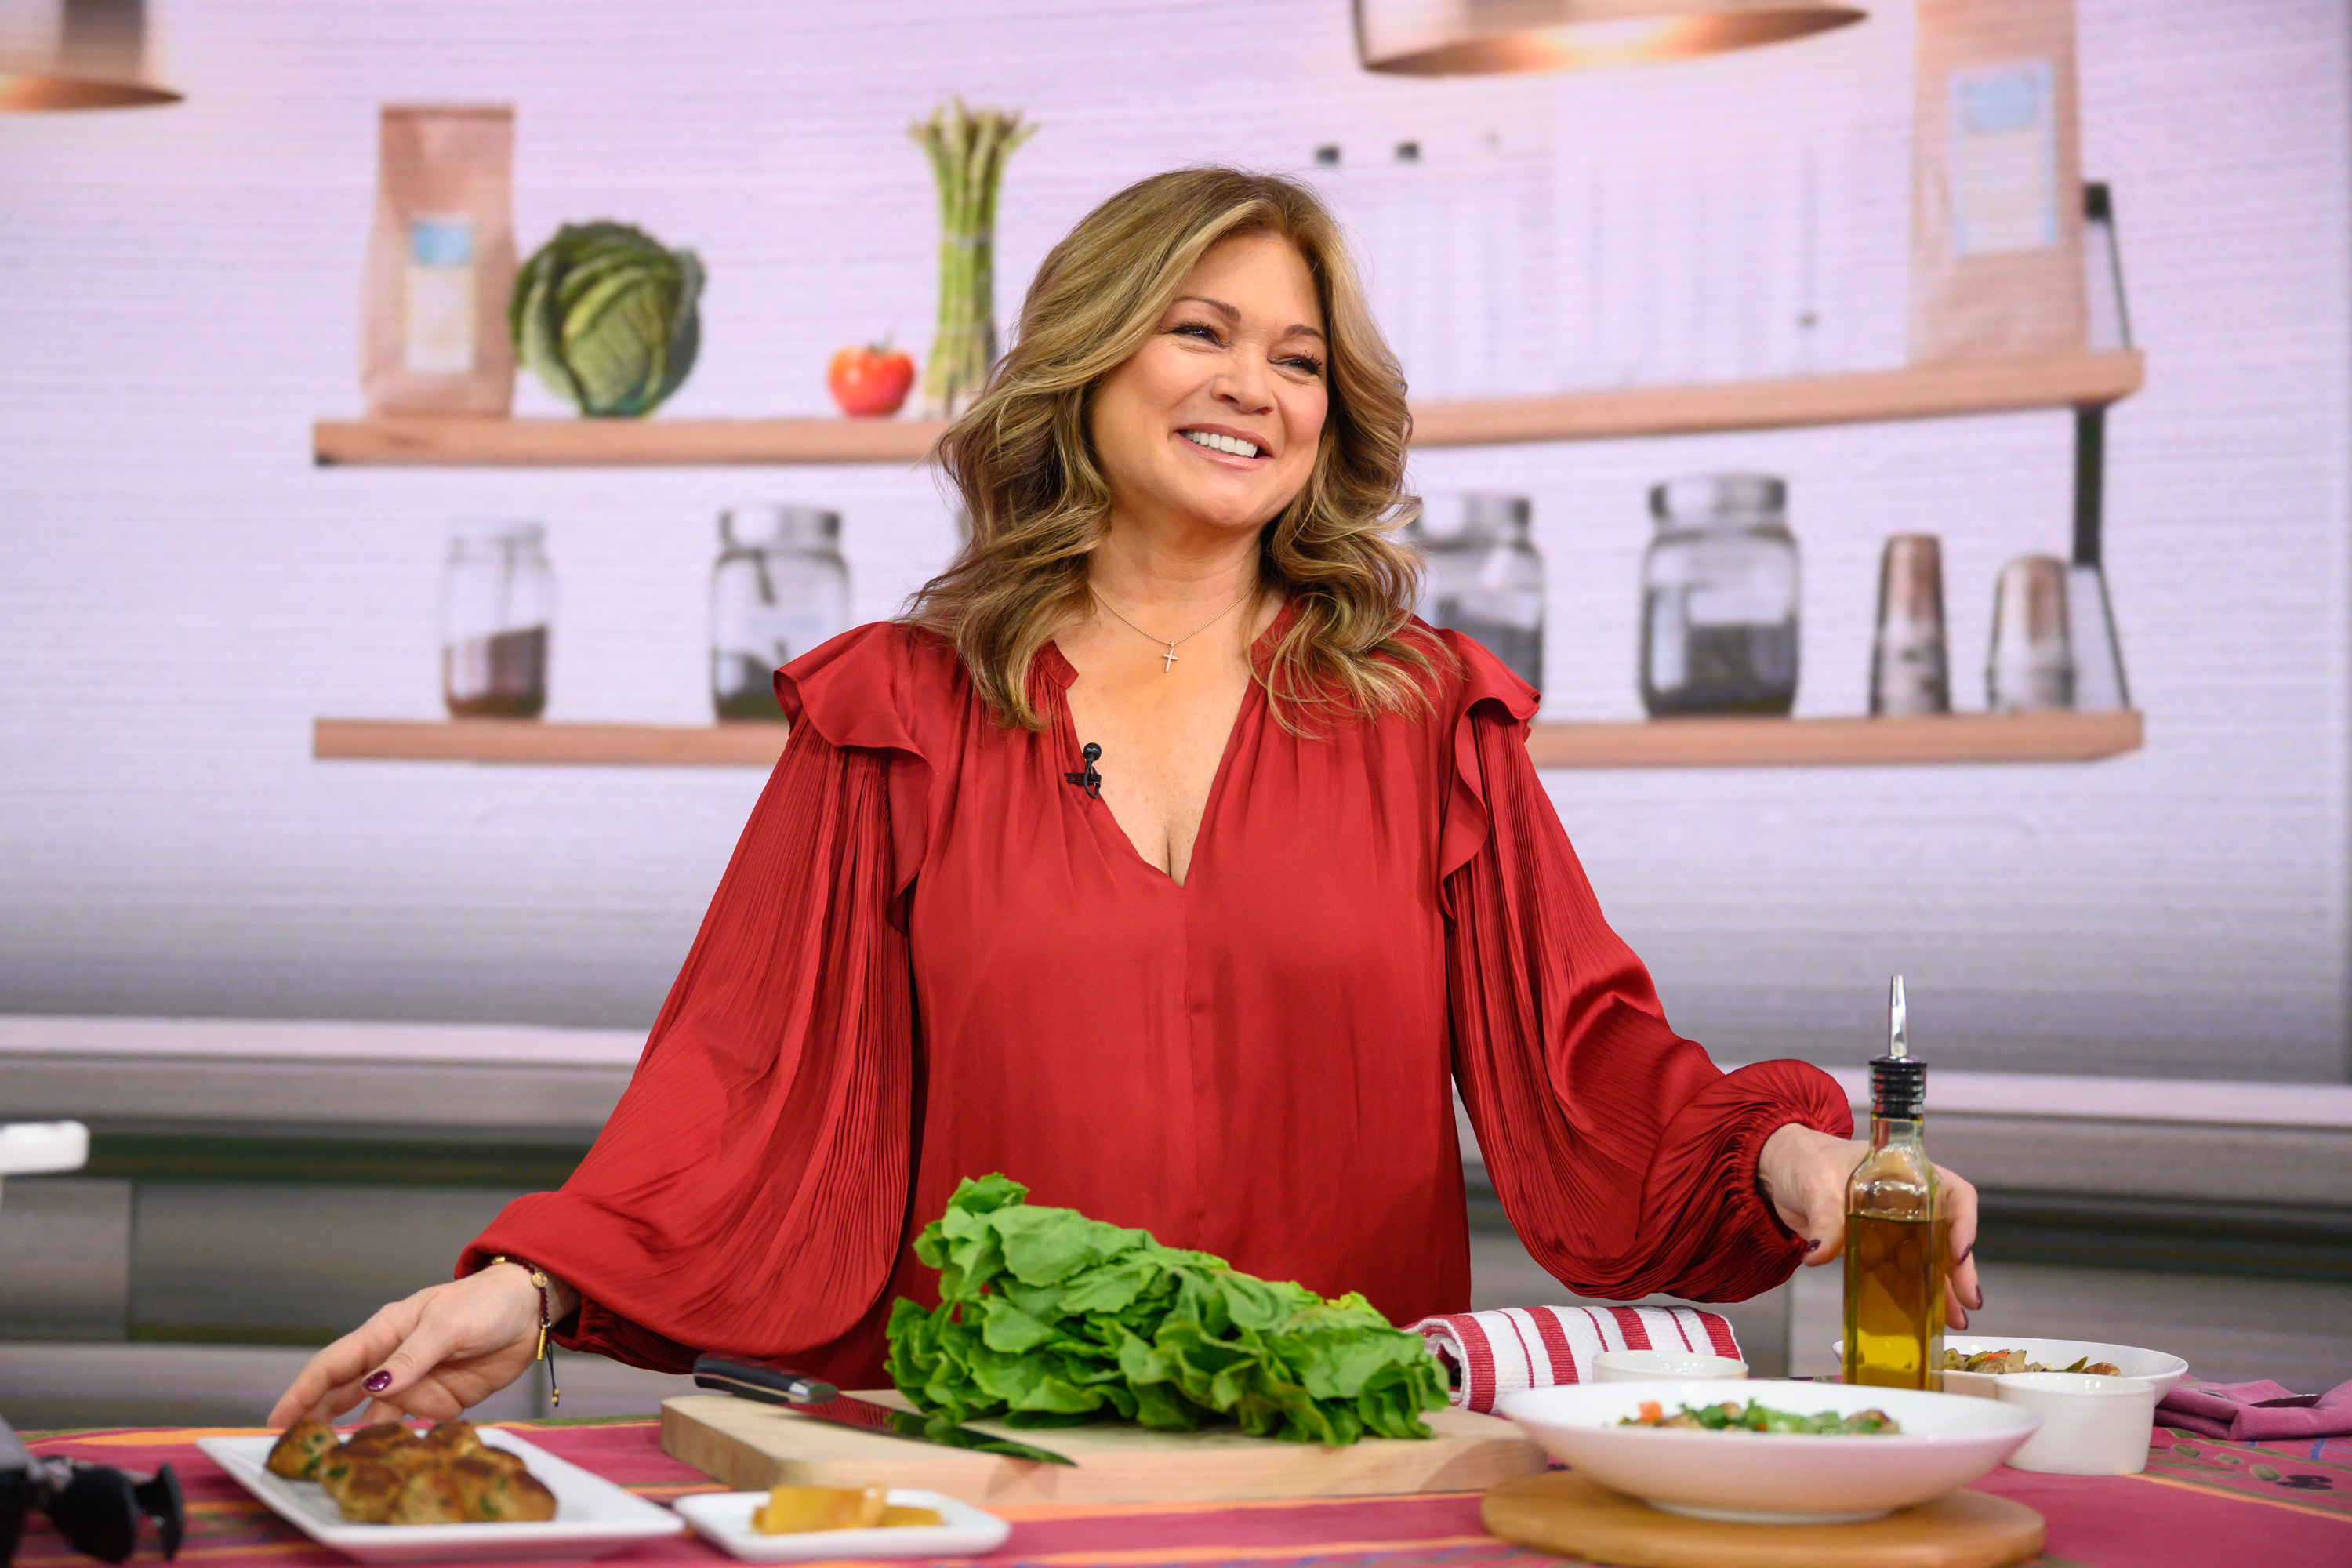 Valerie Bertinelli poses in a red shirt while doing a cooking demonstration.